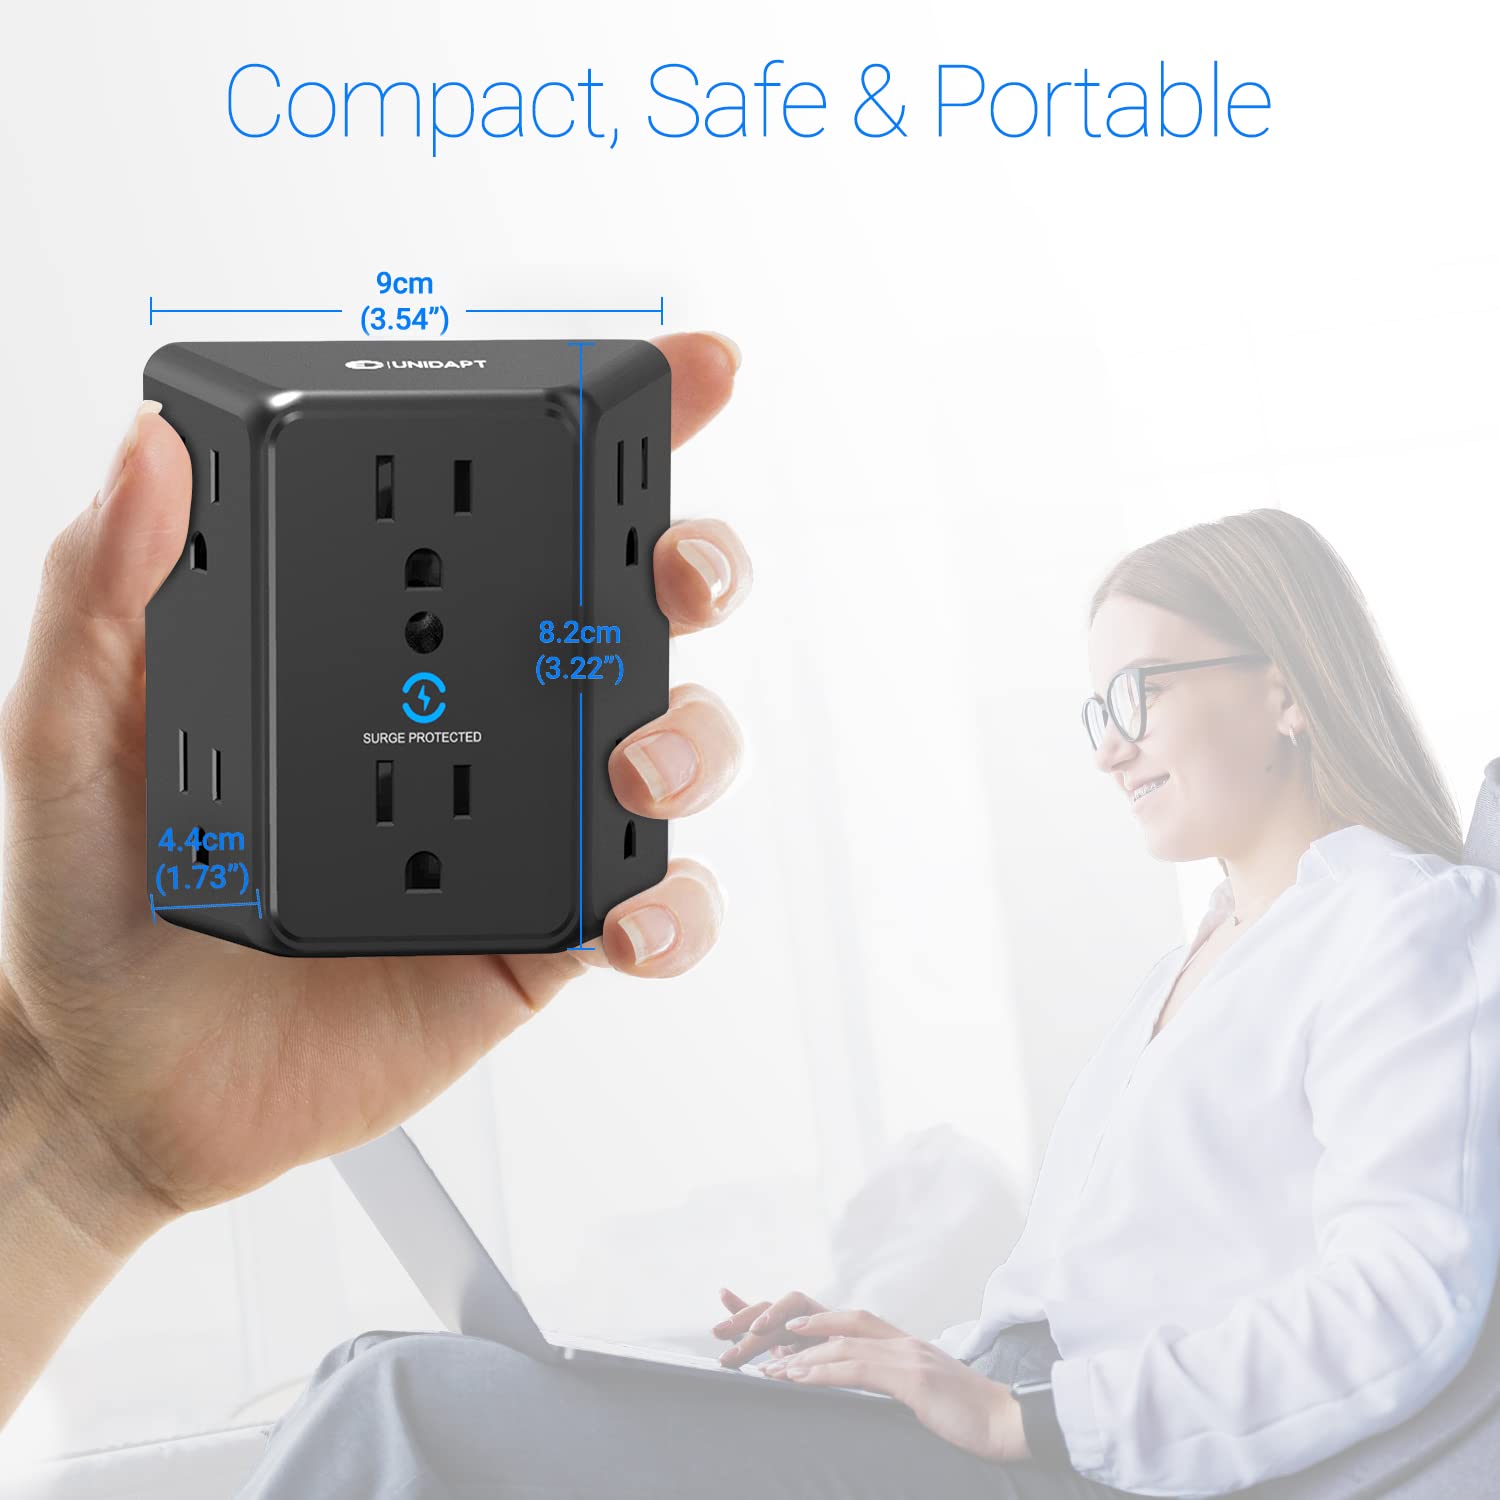 Multi Plug 6 Outlet Extender, Unidapt Black Surge Protector Wall Splitter, 1800J Power Strip 3 Side Wide Spaced Adapter Multiple Charger Expander, Mountable Wall Tap for Office Home Travel ETL Listed